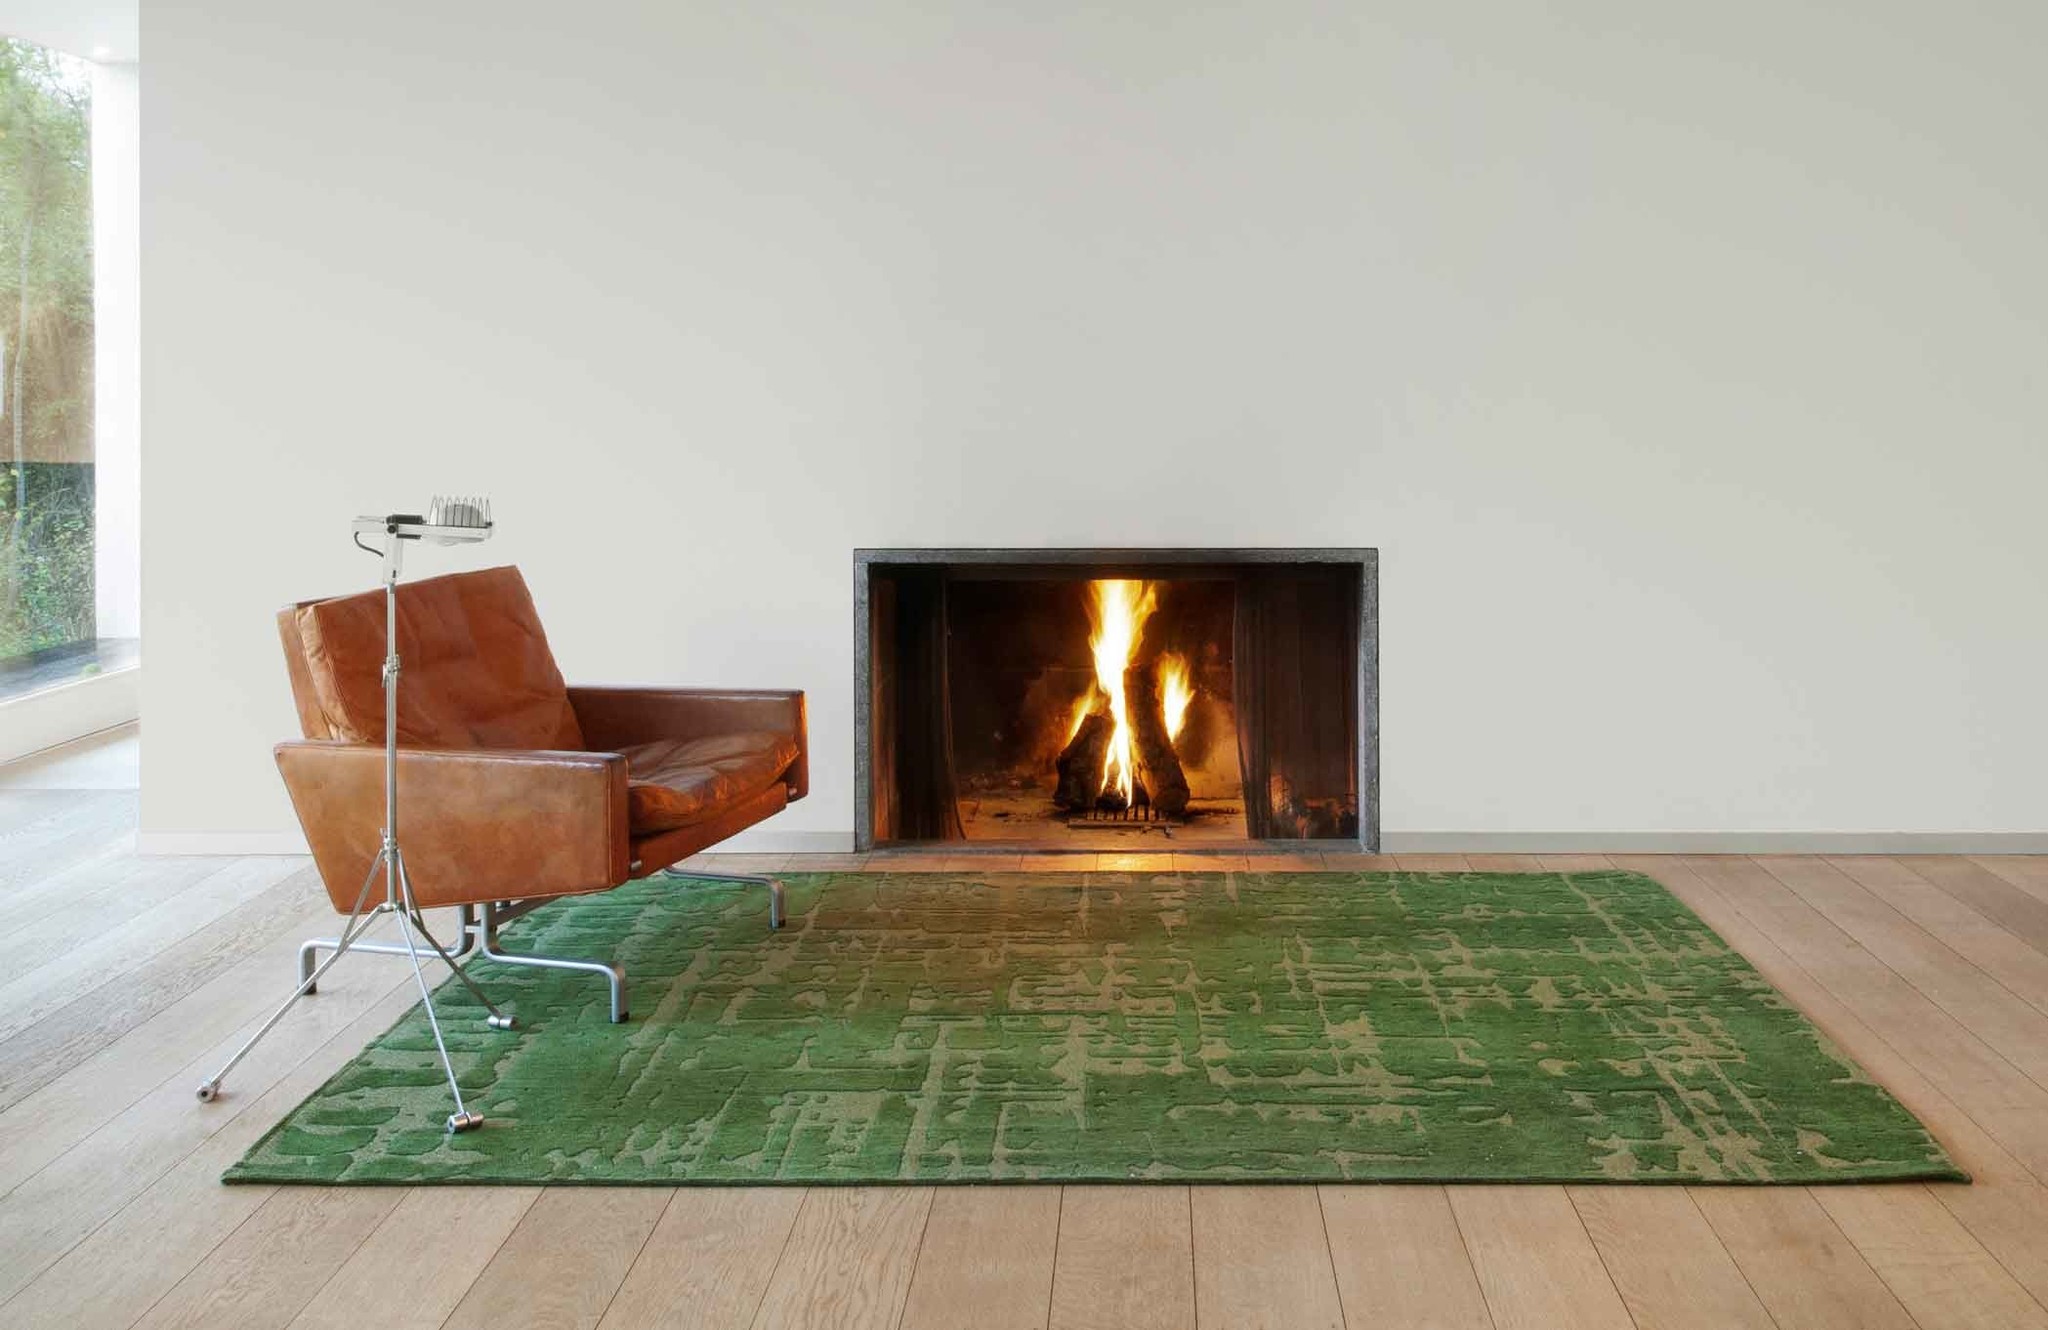 Abstract Green Belgian Rug ☞ Size: 6' 7" x 9' 2" (200 x 280 cm)